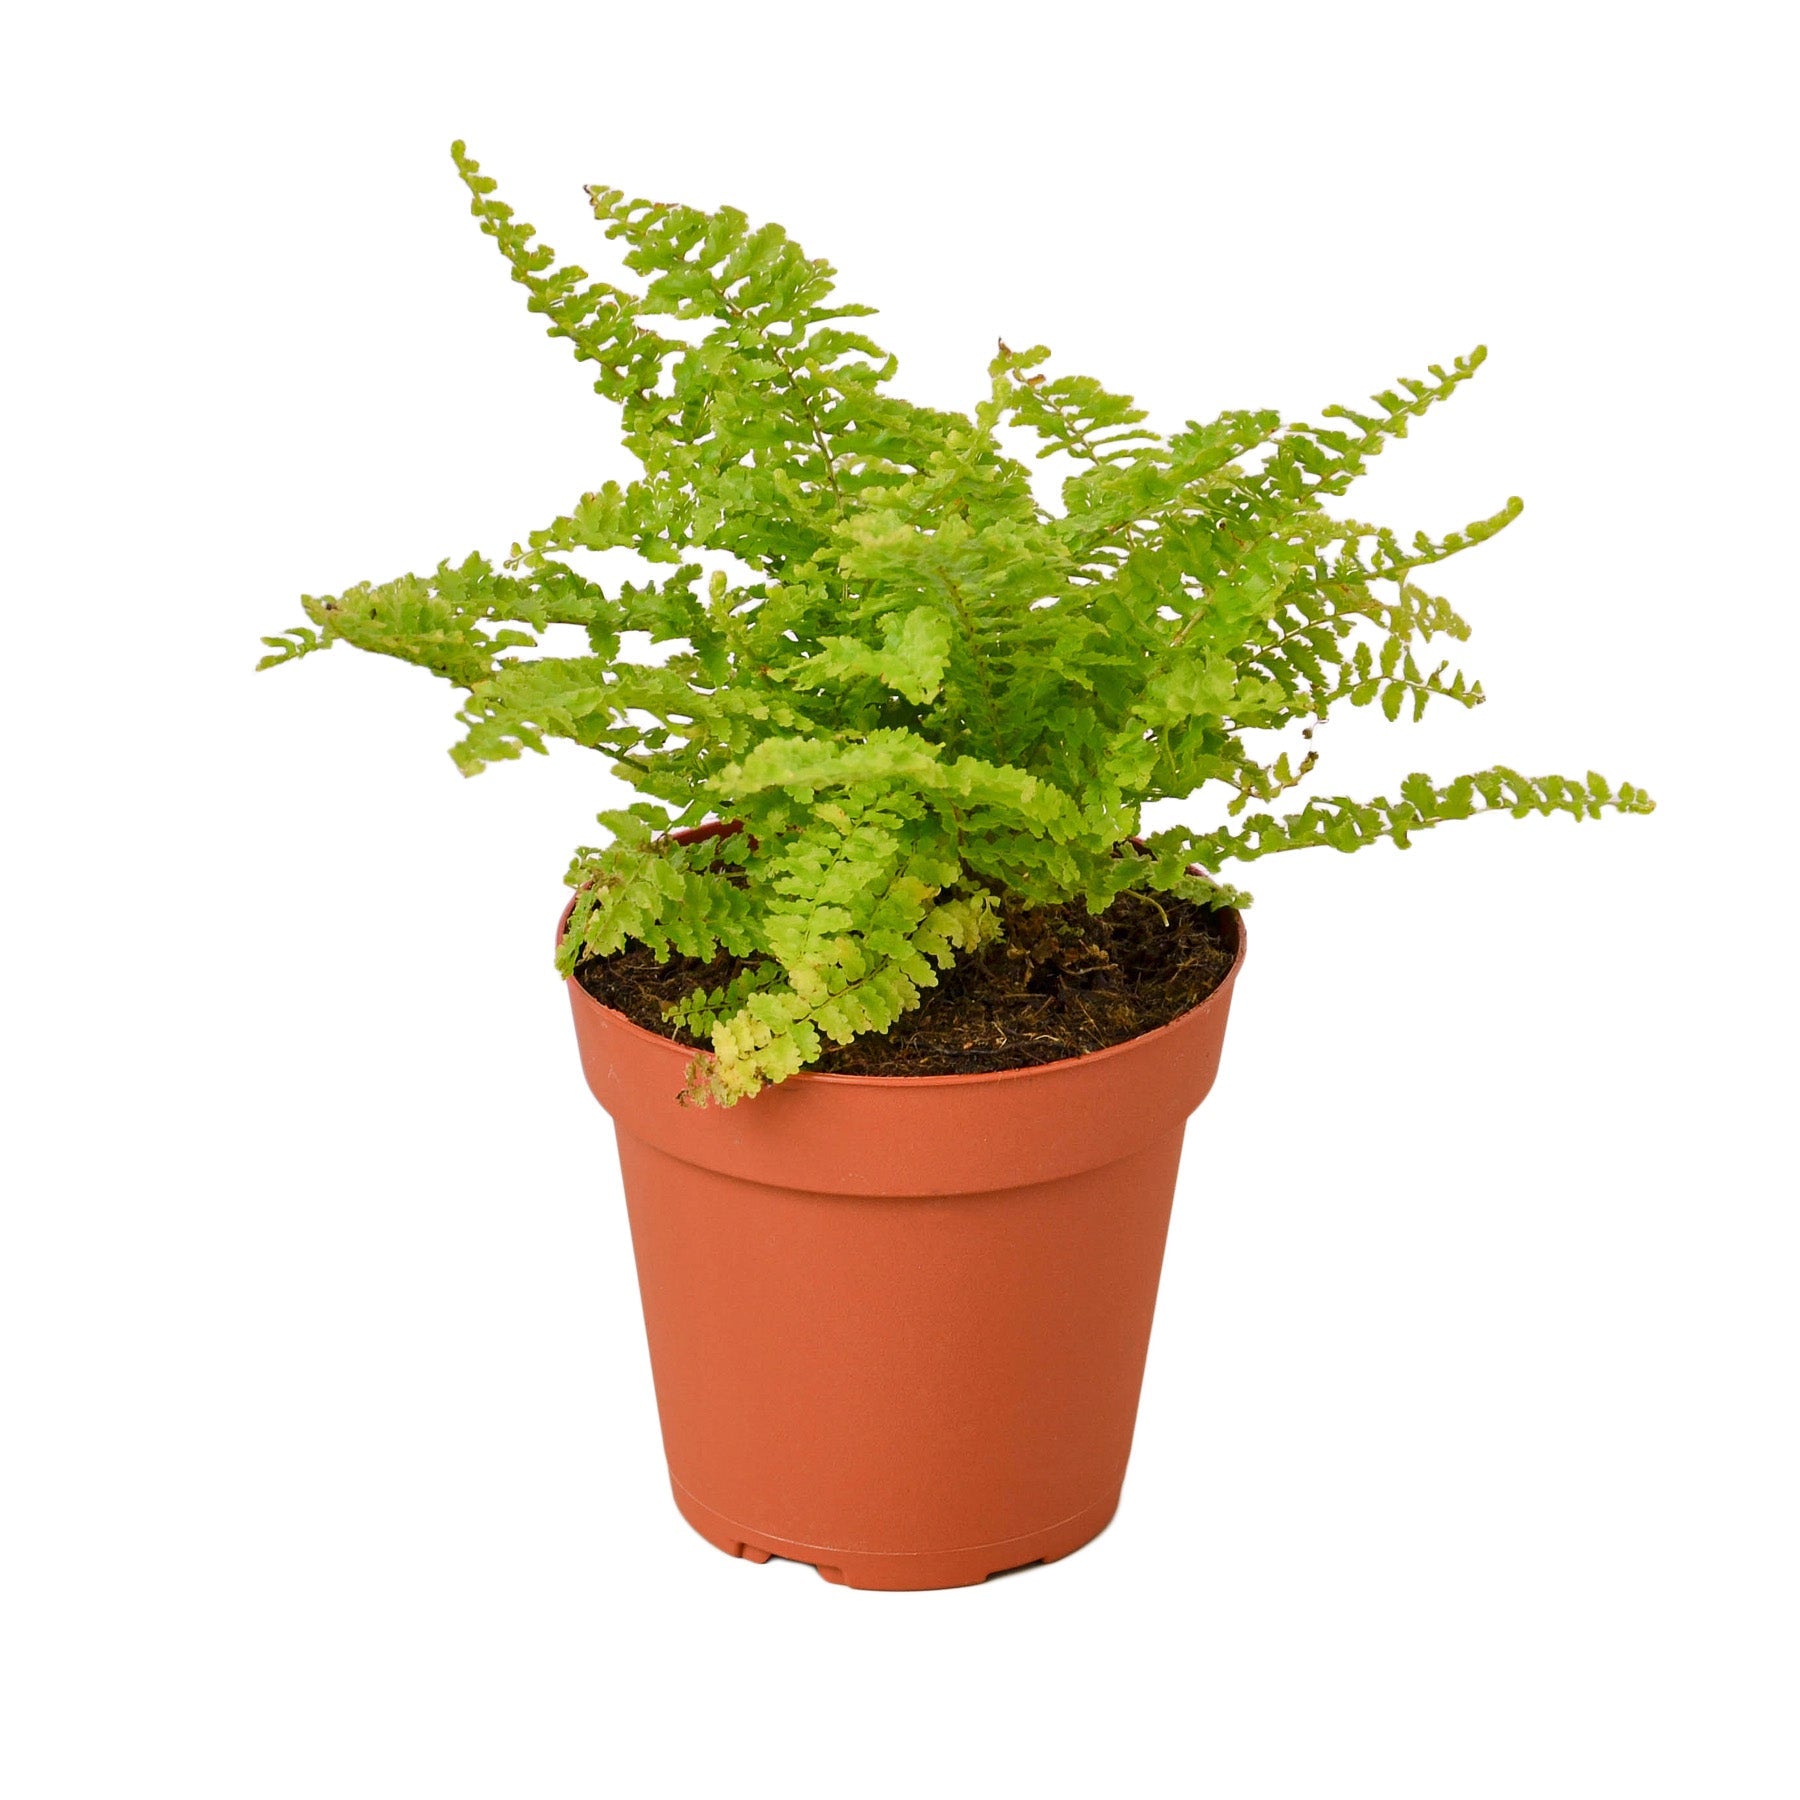 A fern plant in a pot on a white background at a garden center near me.